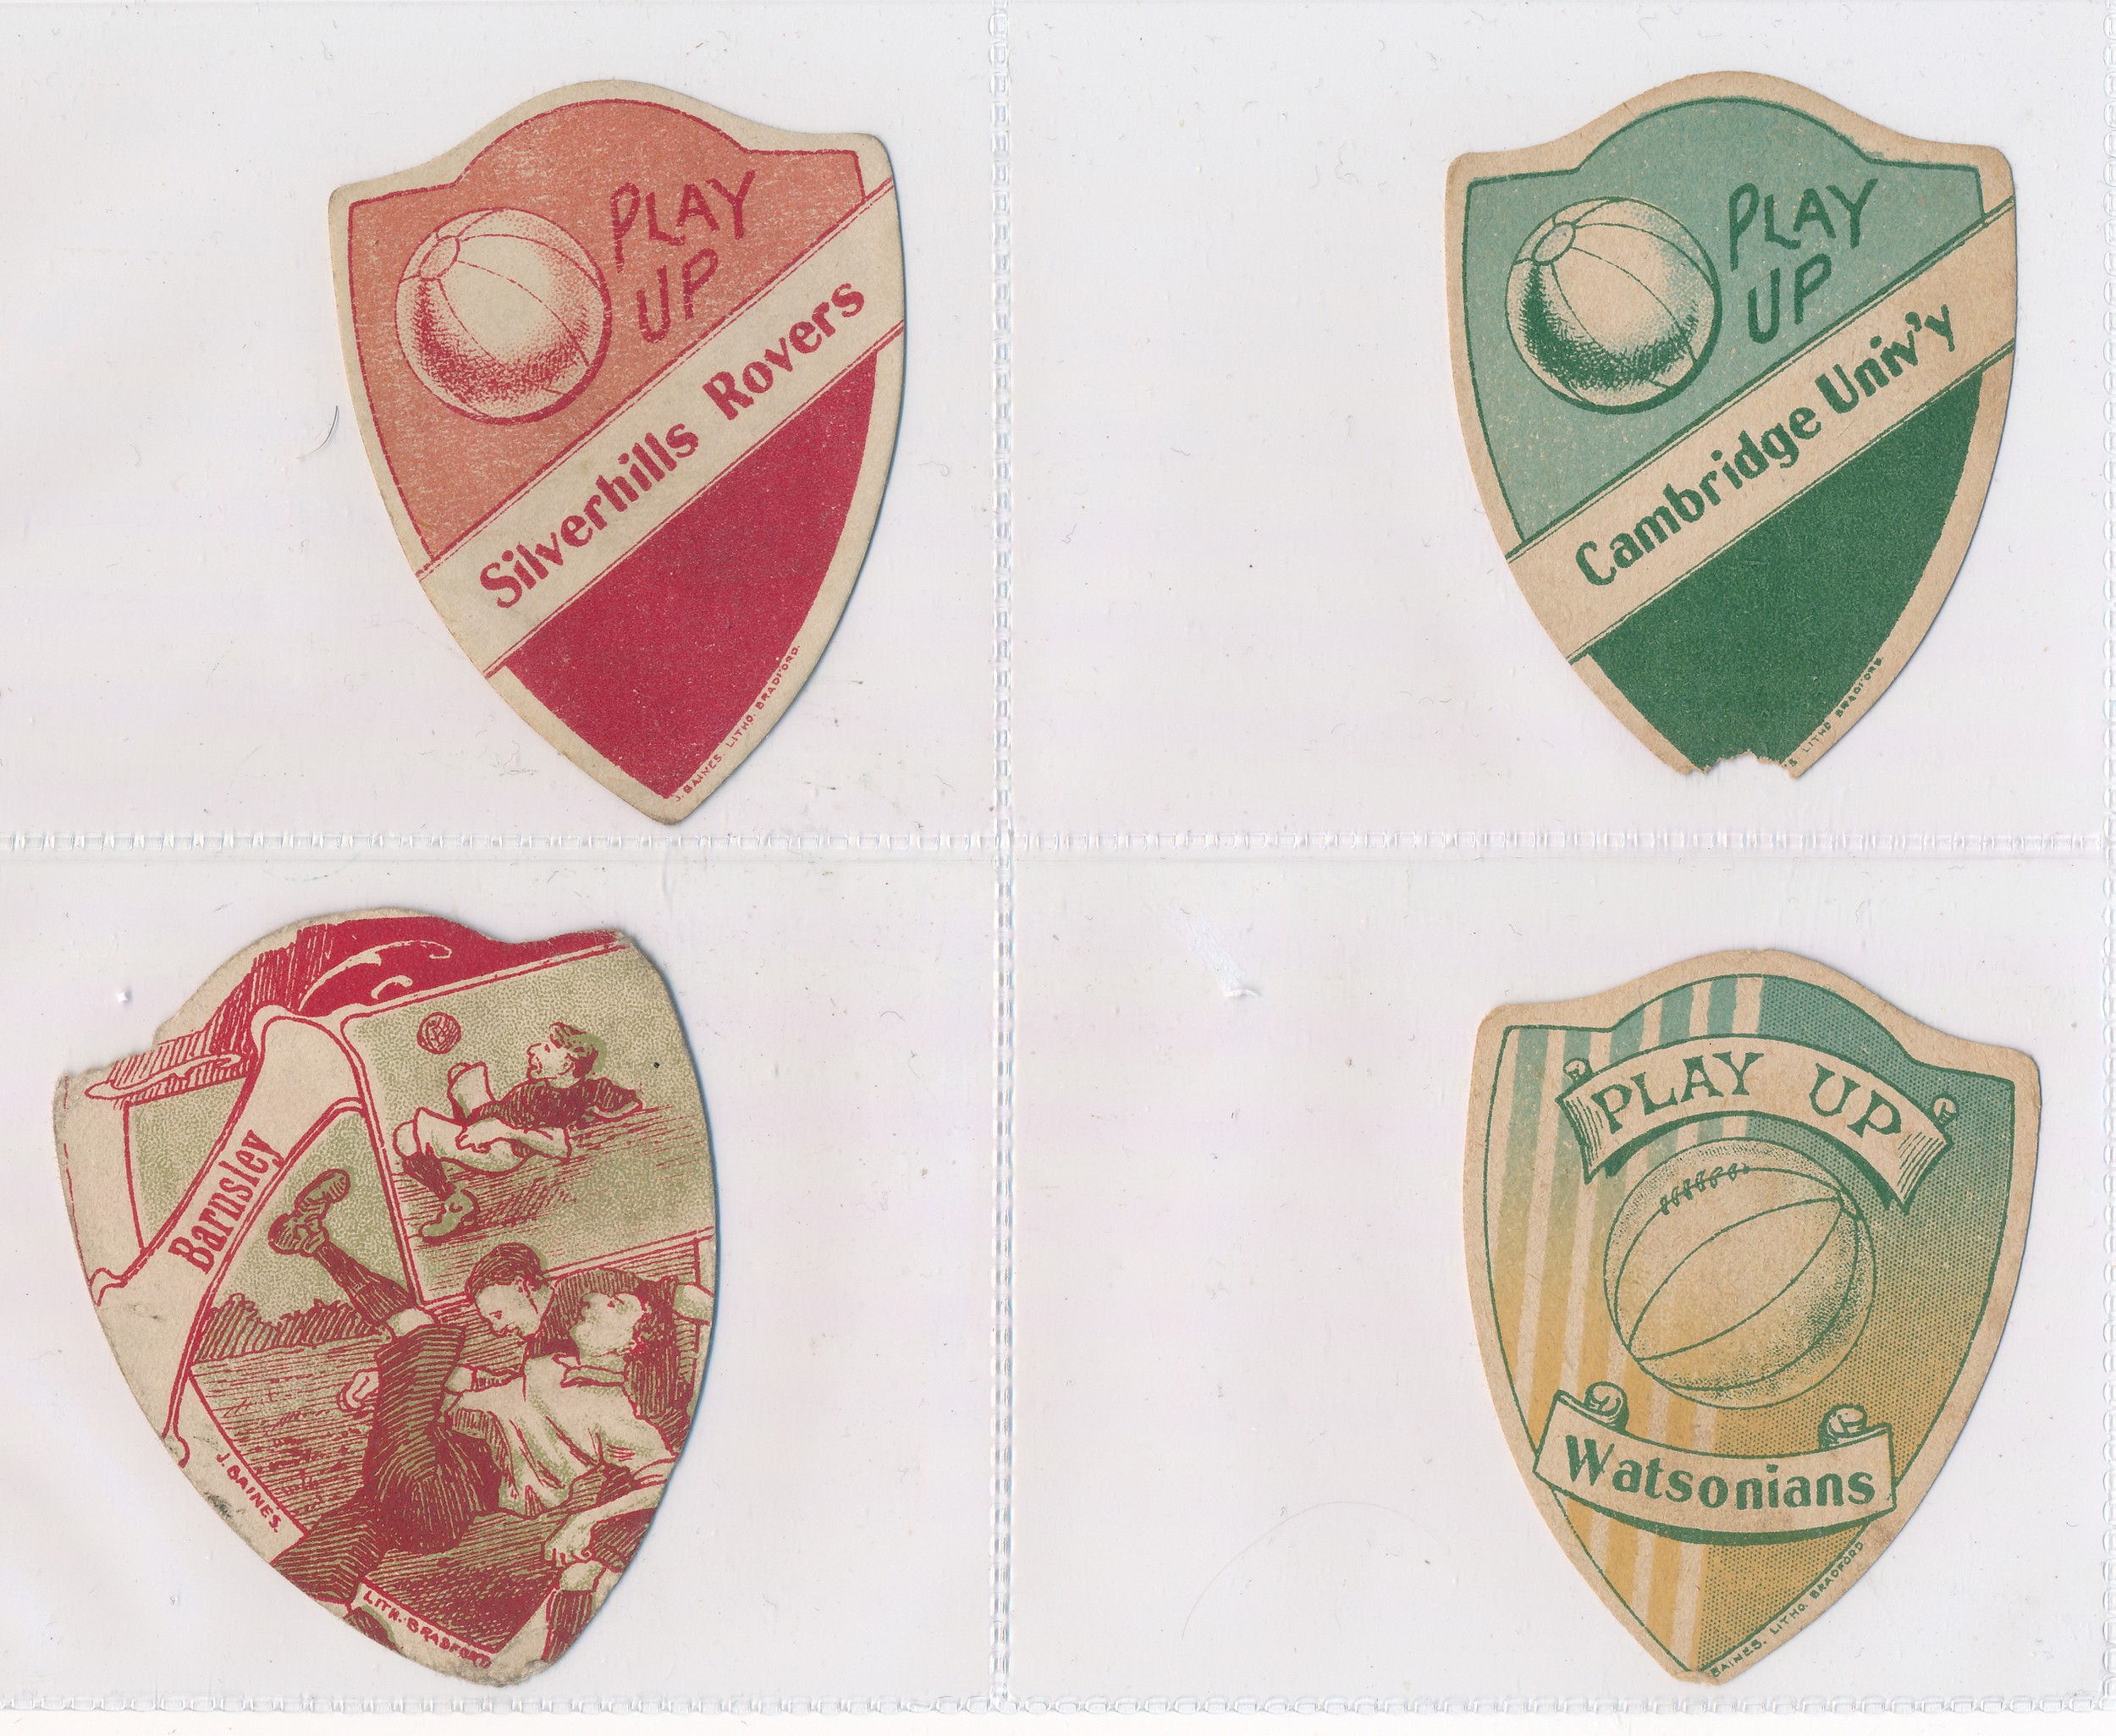 Baines trade cards, Shield shaped Football cards (8), with Wallsend Park Villa, Morley, - Image 3 of 4